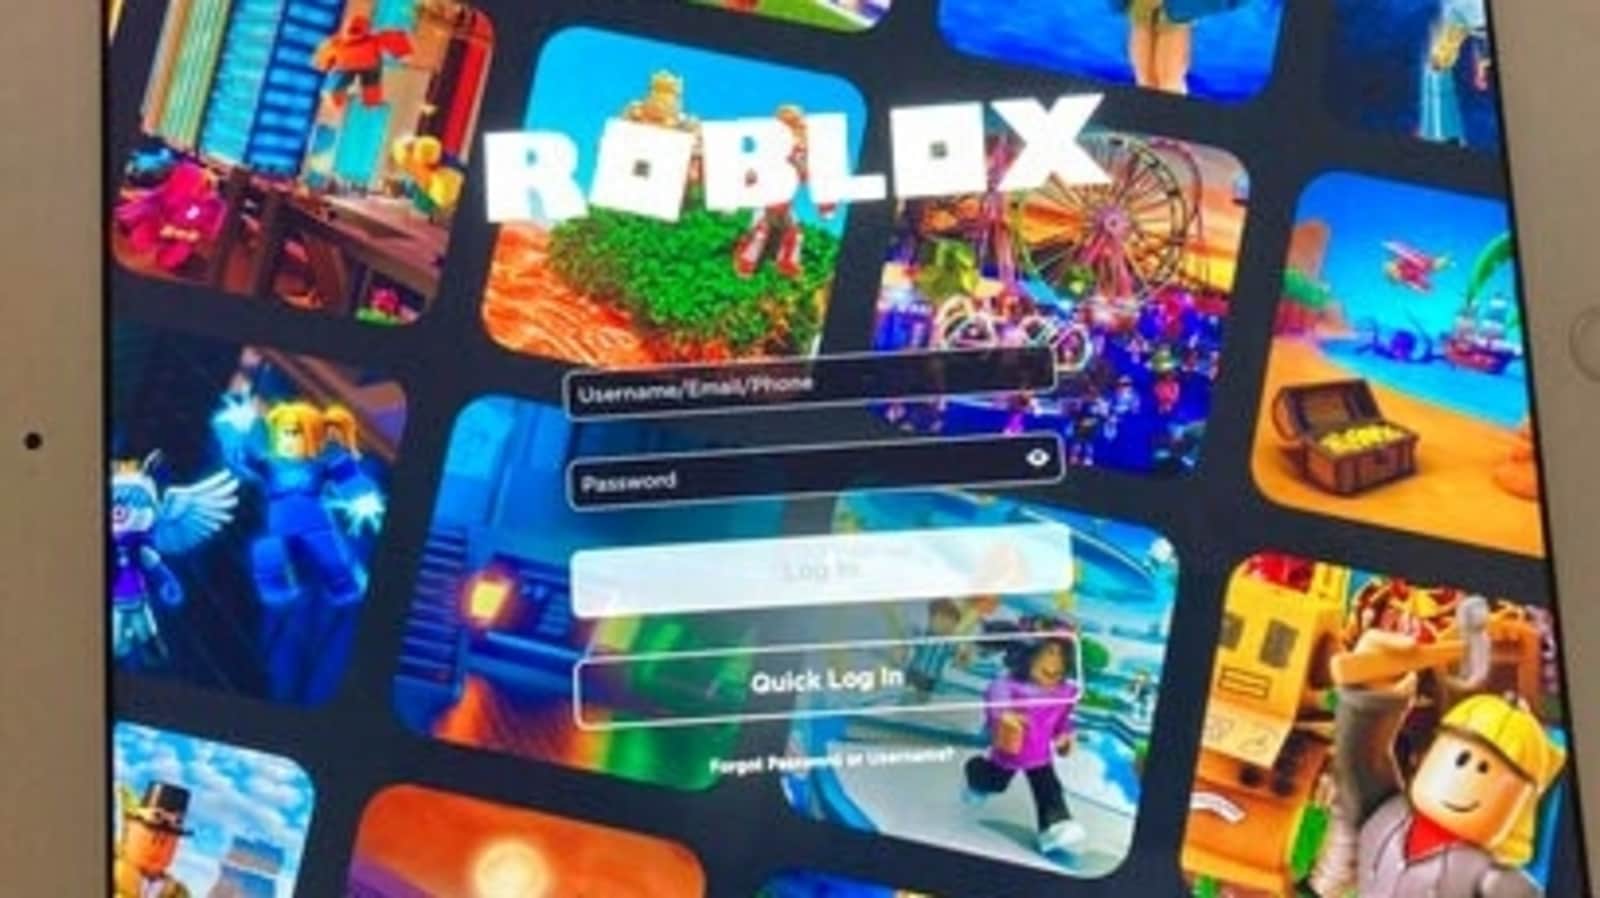 Roblox - Play Roblox Game Online